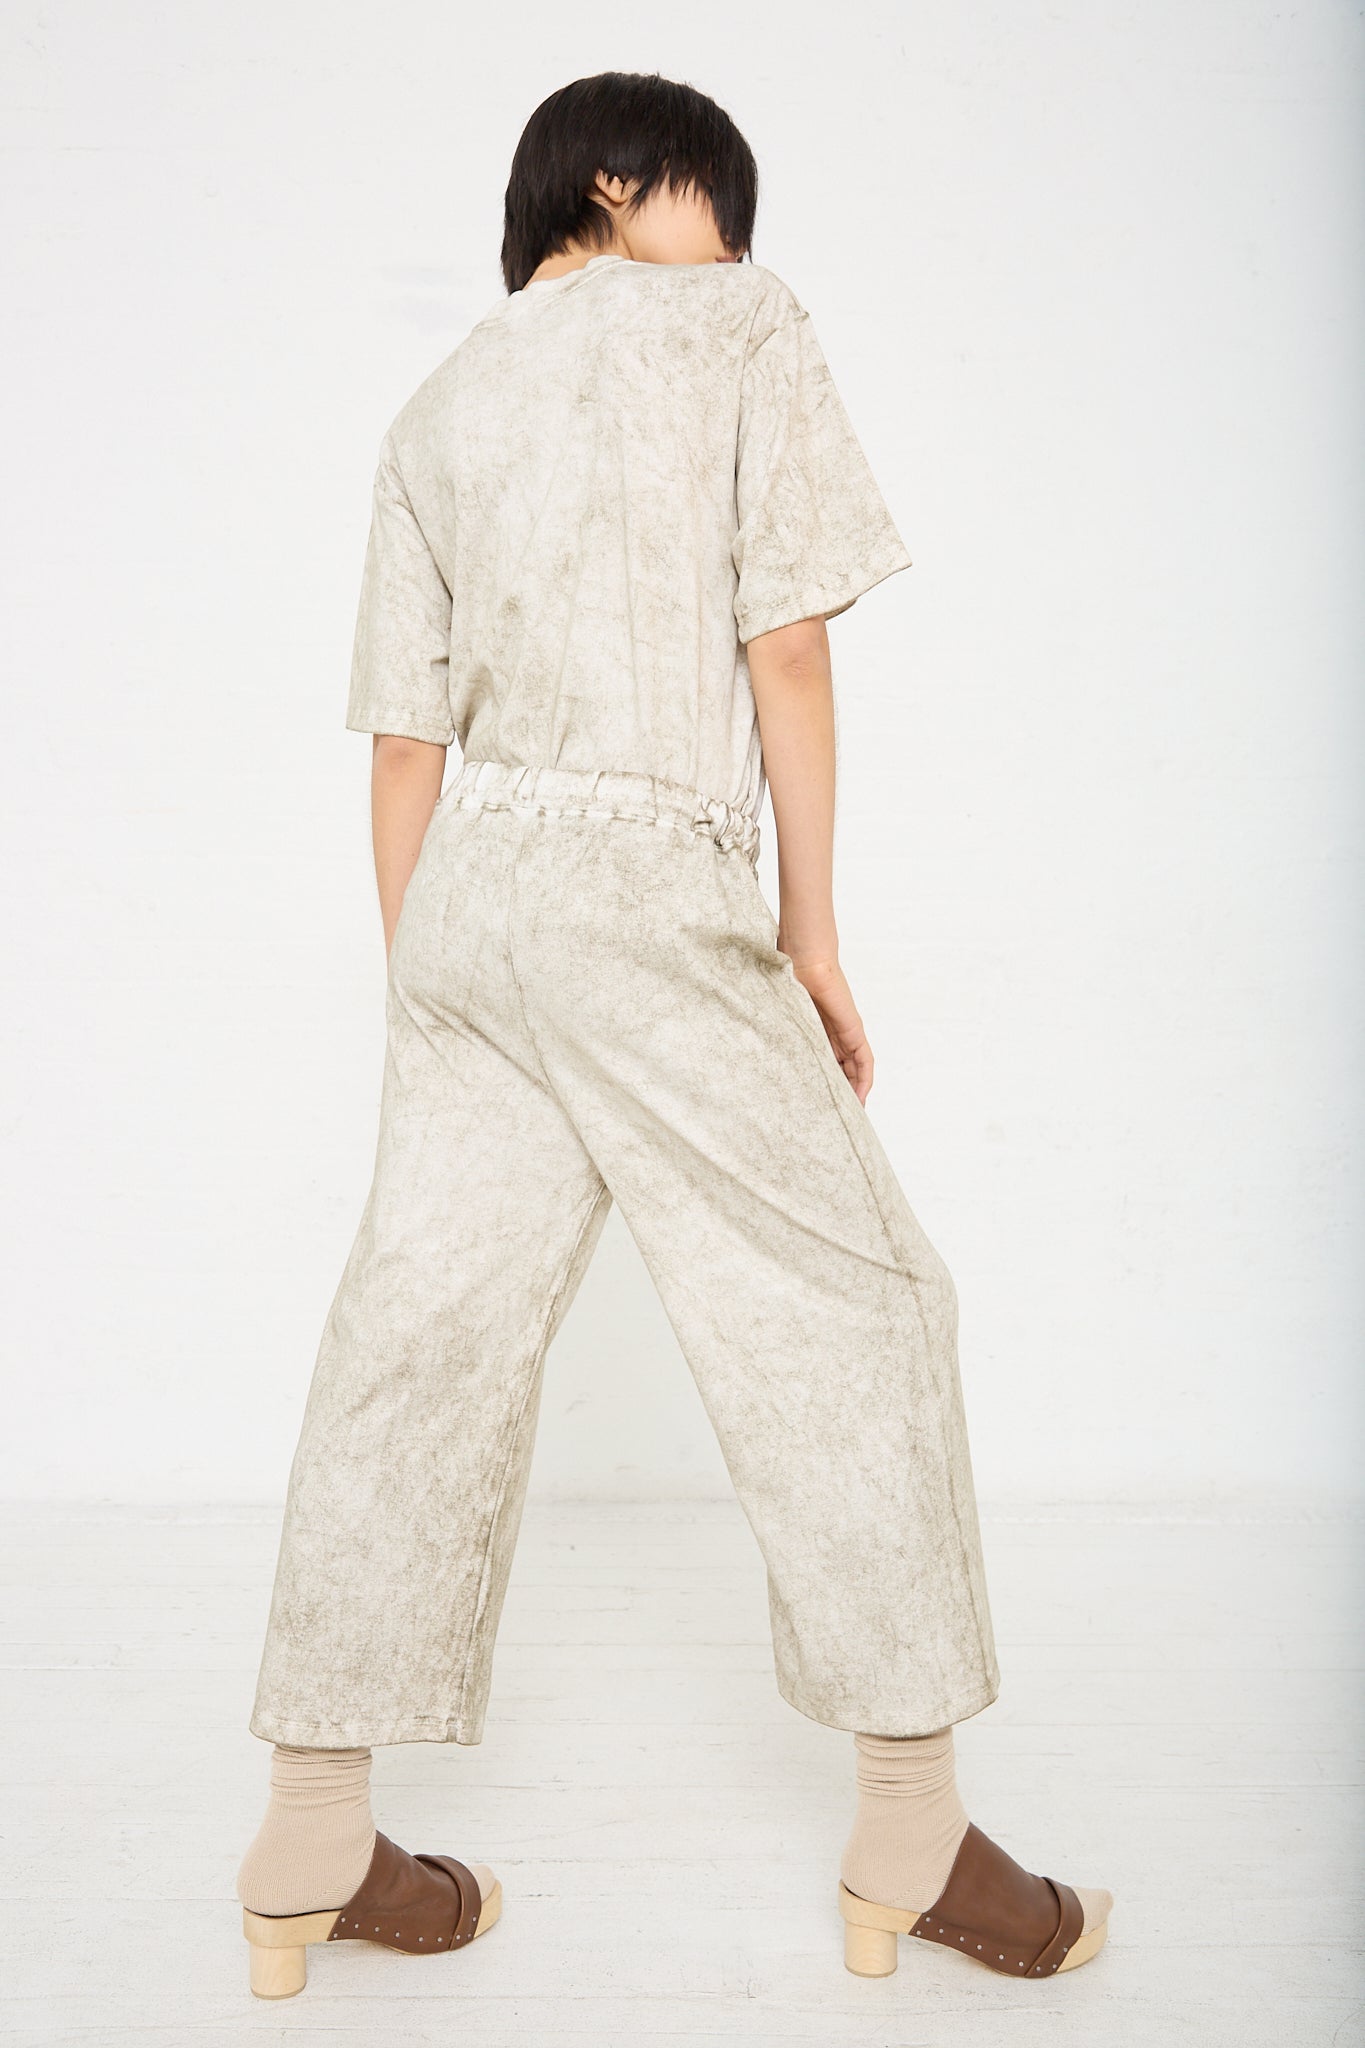 A woman is standing in a white room wearing a Pima Cotton Lunar Pant in Olive from Lauren Manoogian. Back view.